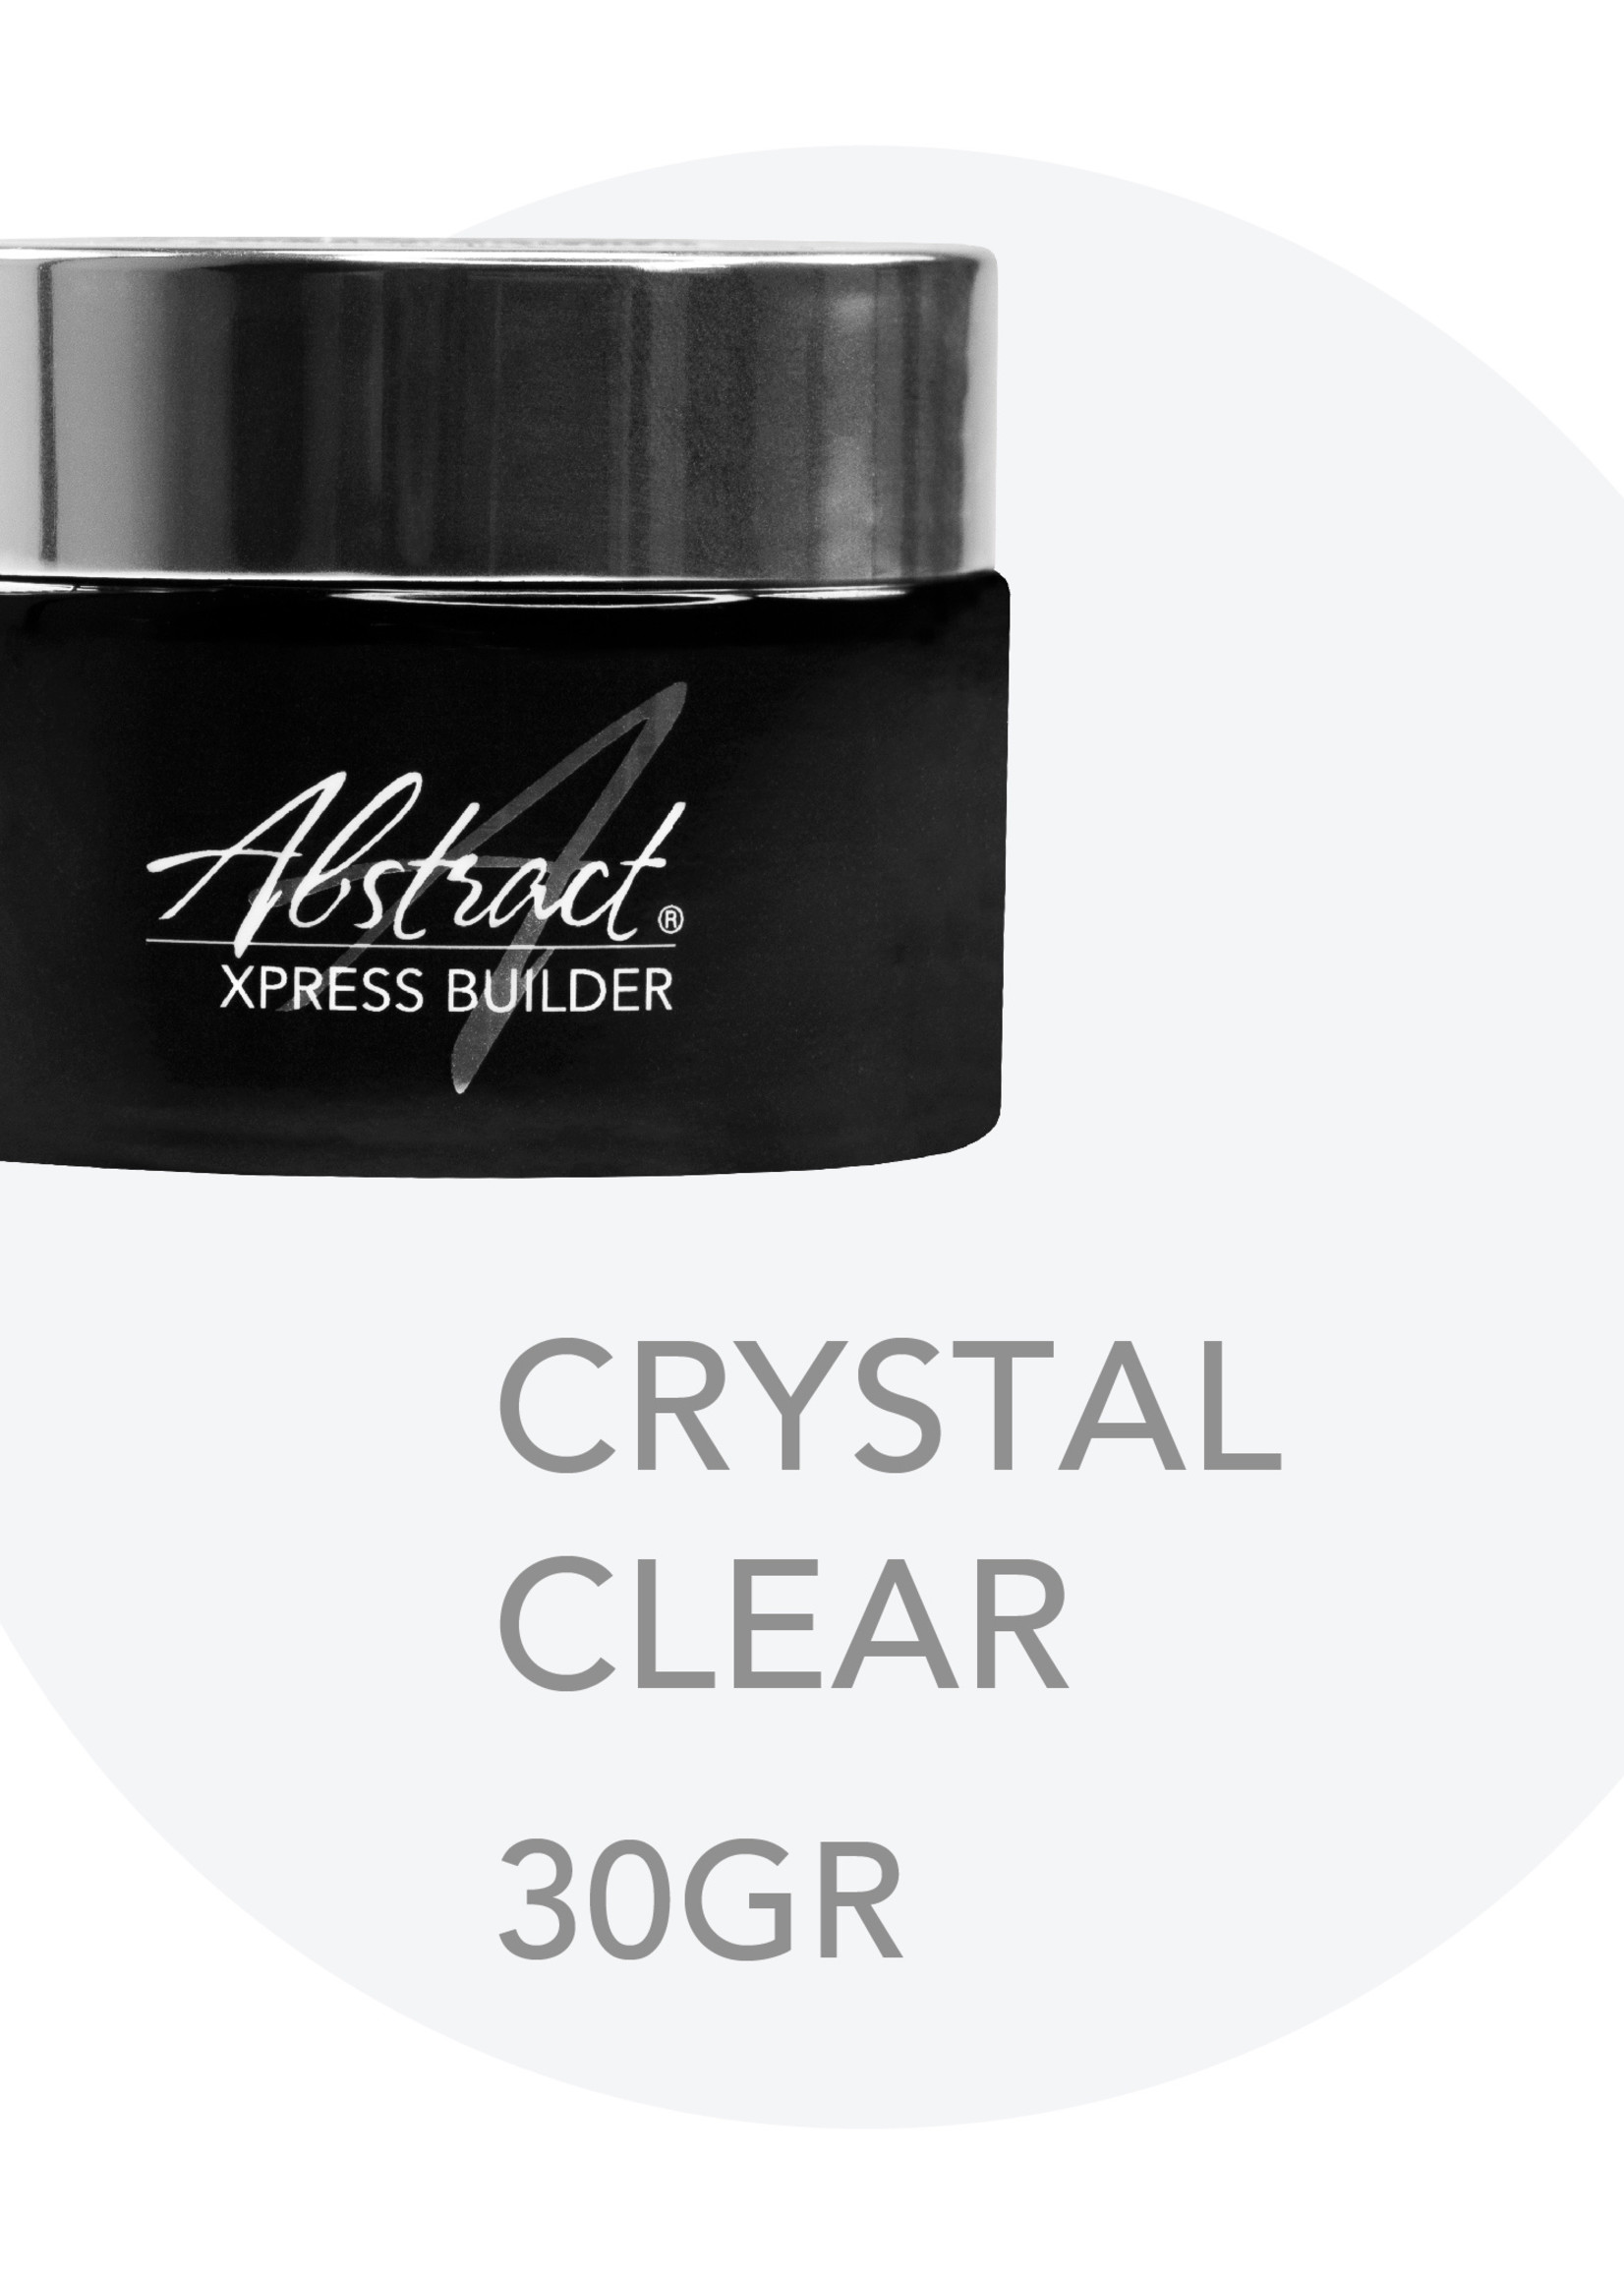 Abstract® Xpress Builder Gel Crystal Clear 30 gr